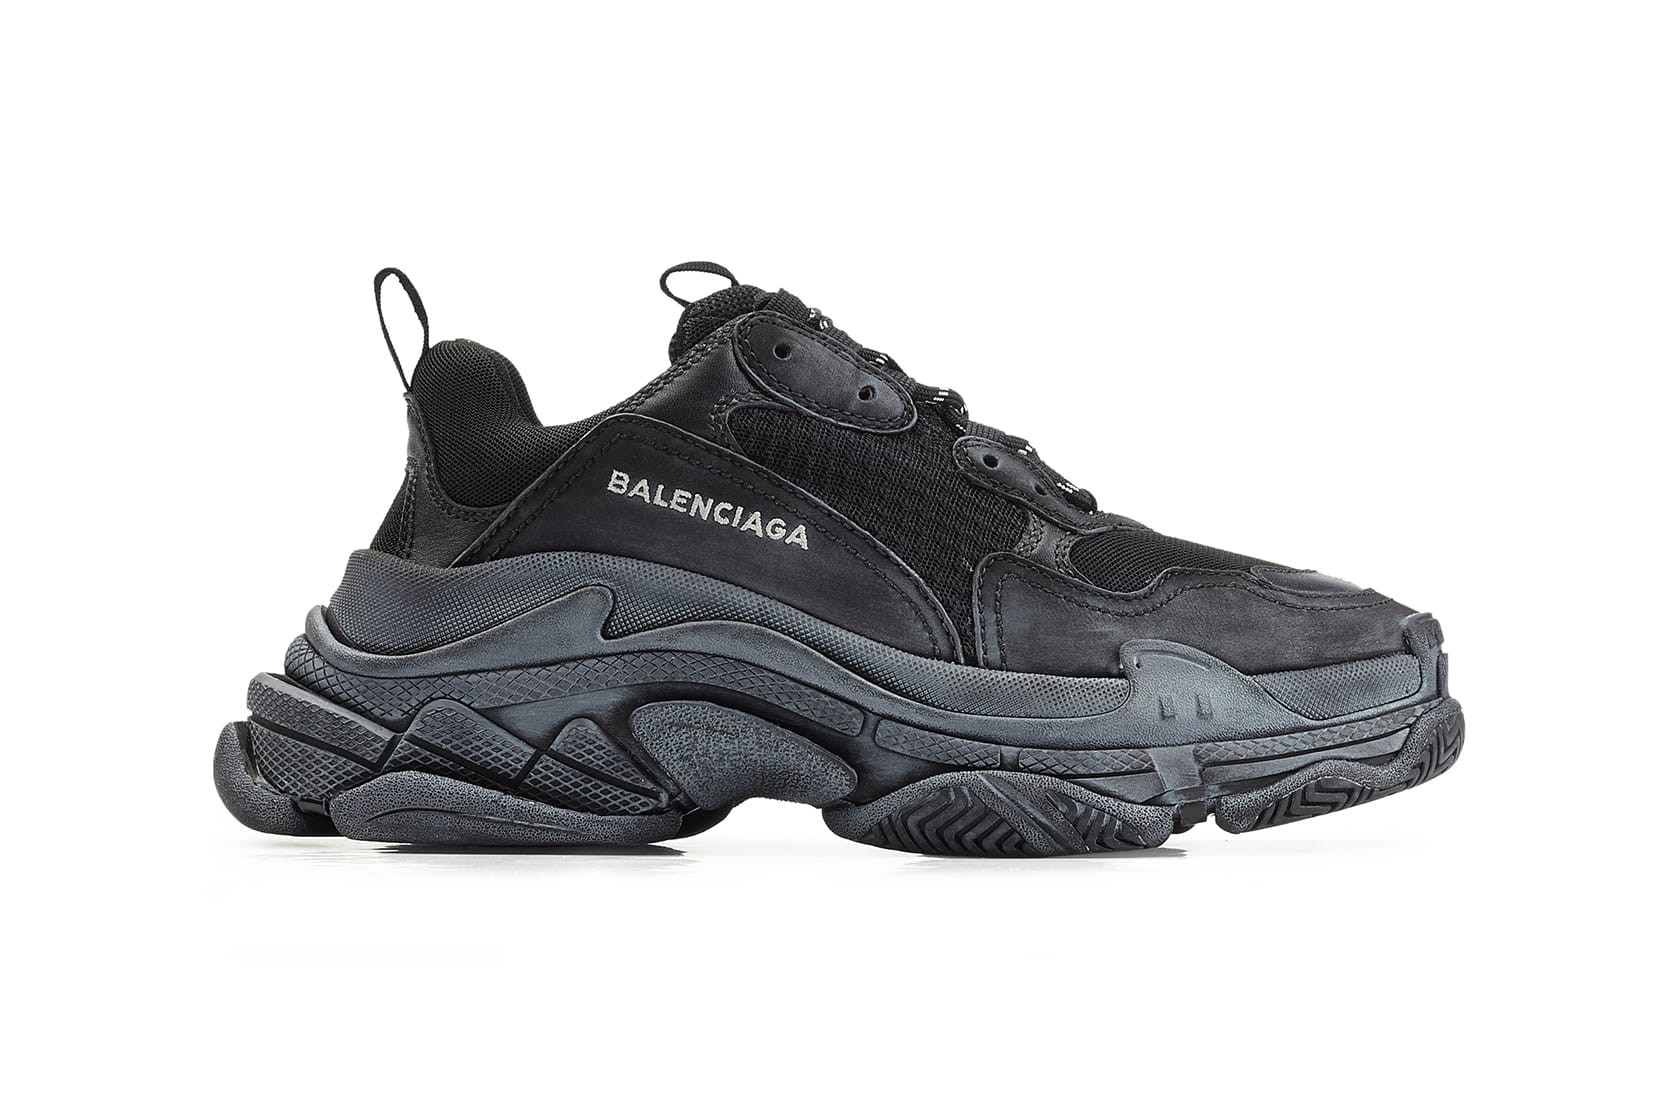 New Balenciaga Triple S Colorways Are Dropping | HYPEBEAST